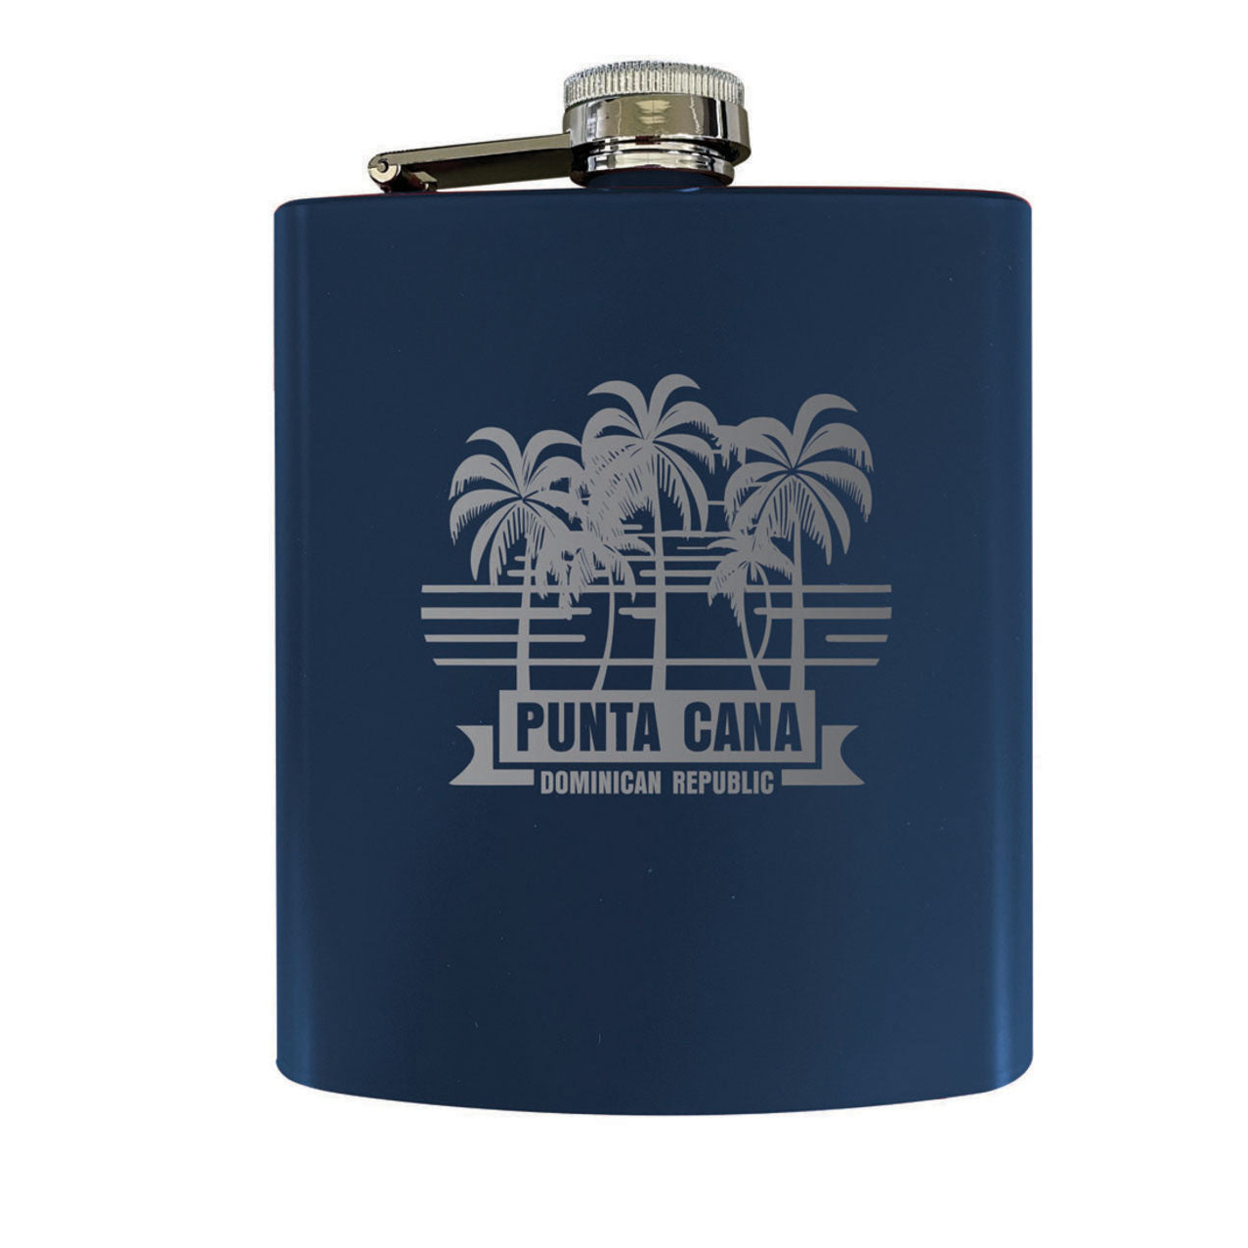 Punta Cana Dominican Republic Souvenir Engraved Matte Finish Stainless Steel 7 Oz Flask - Red, PALM BEACH